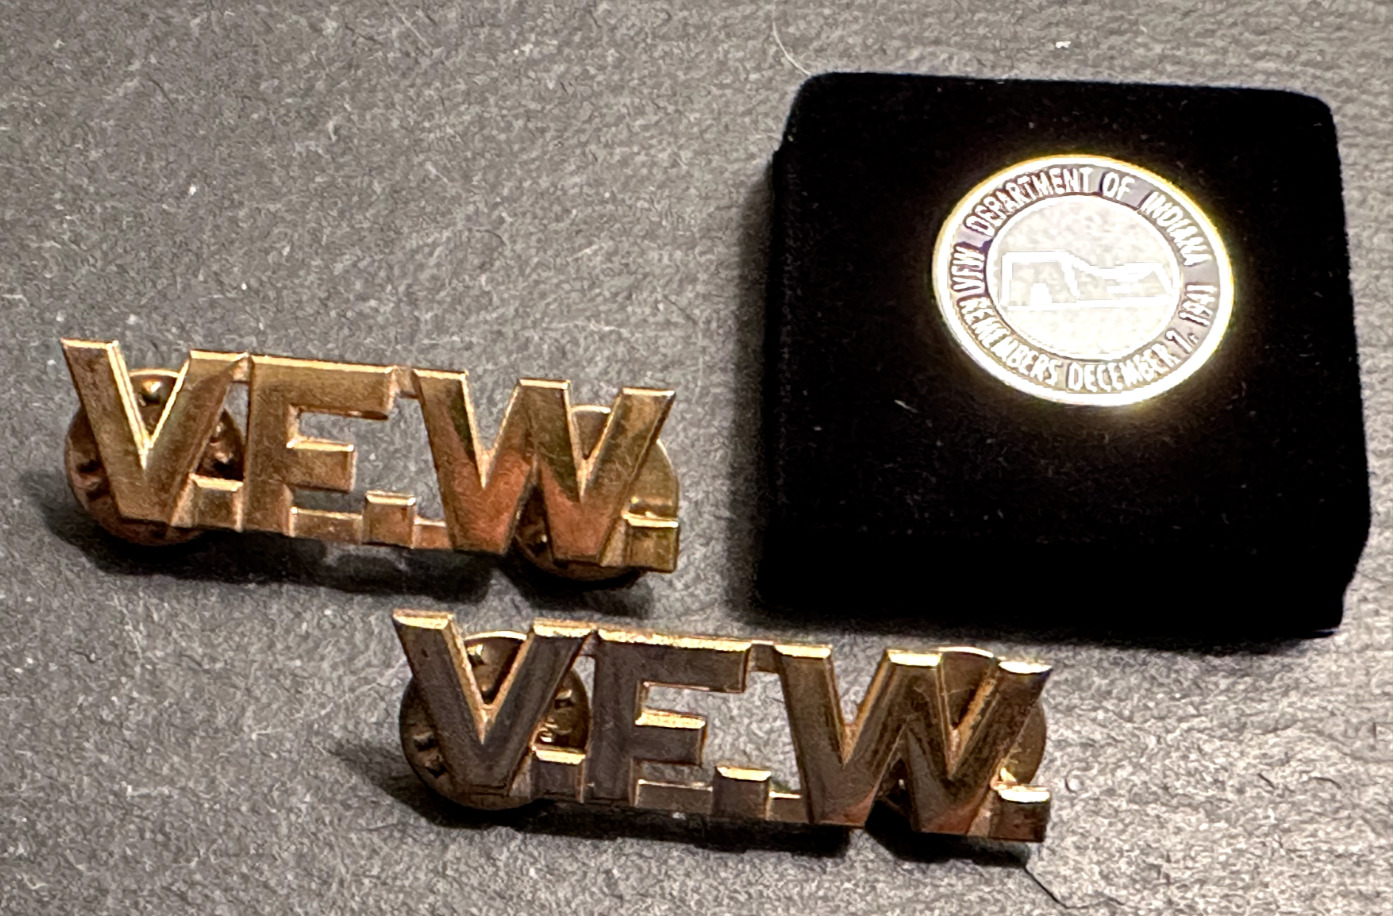 VFW PINS: INDIANA REMEMBERS 12/7/41 & 2 VFW GOLD TONE D89